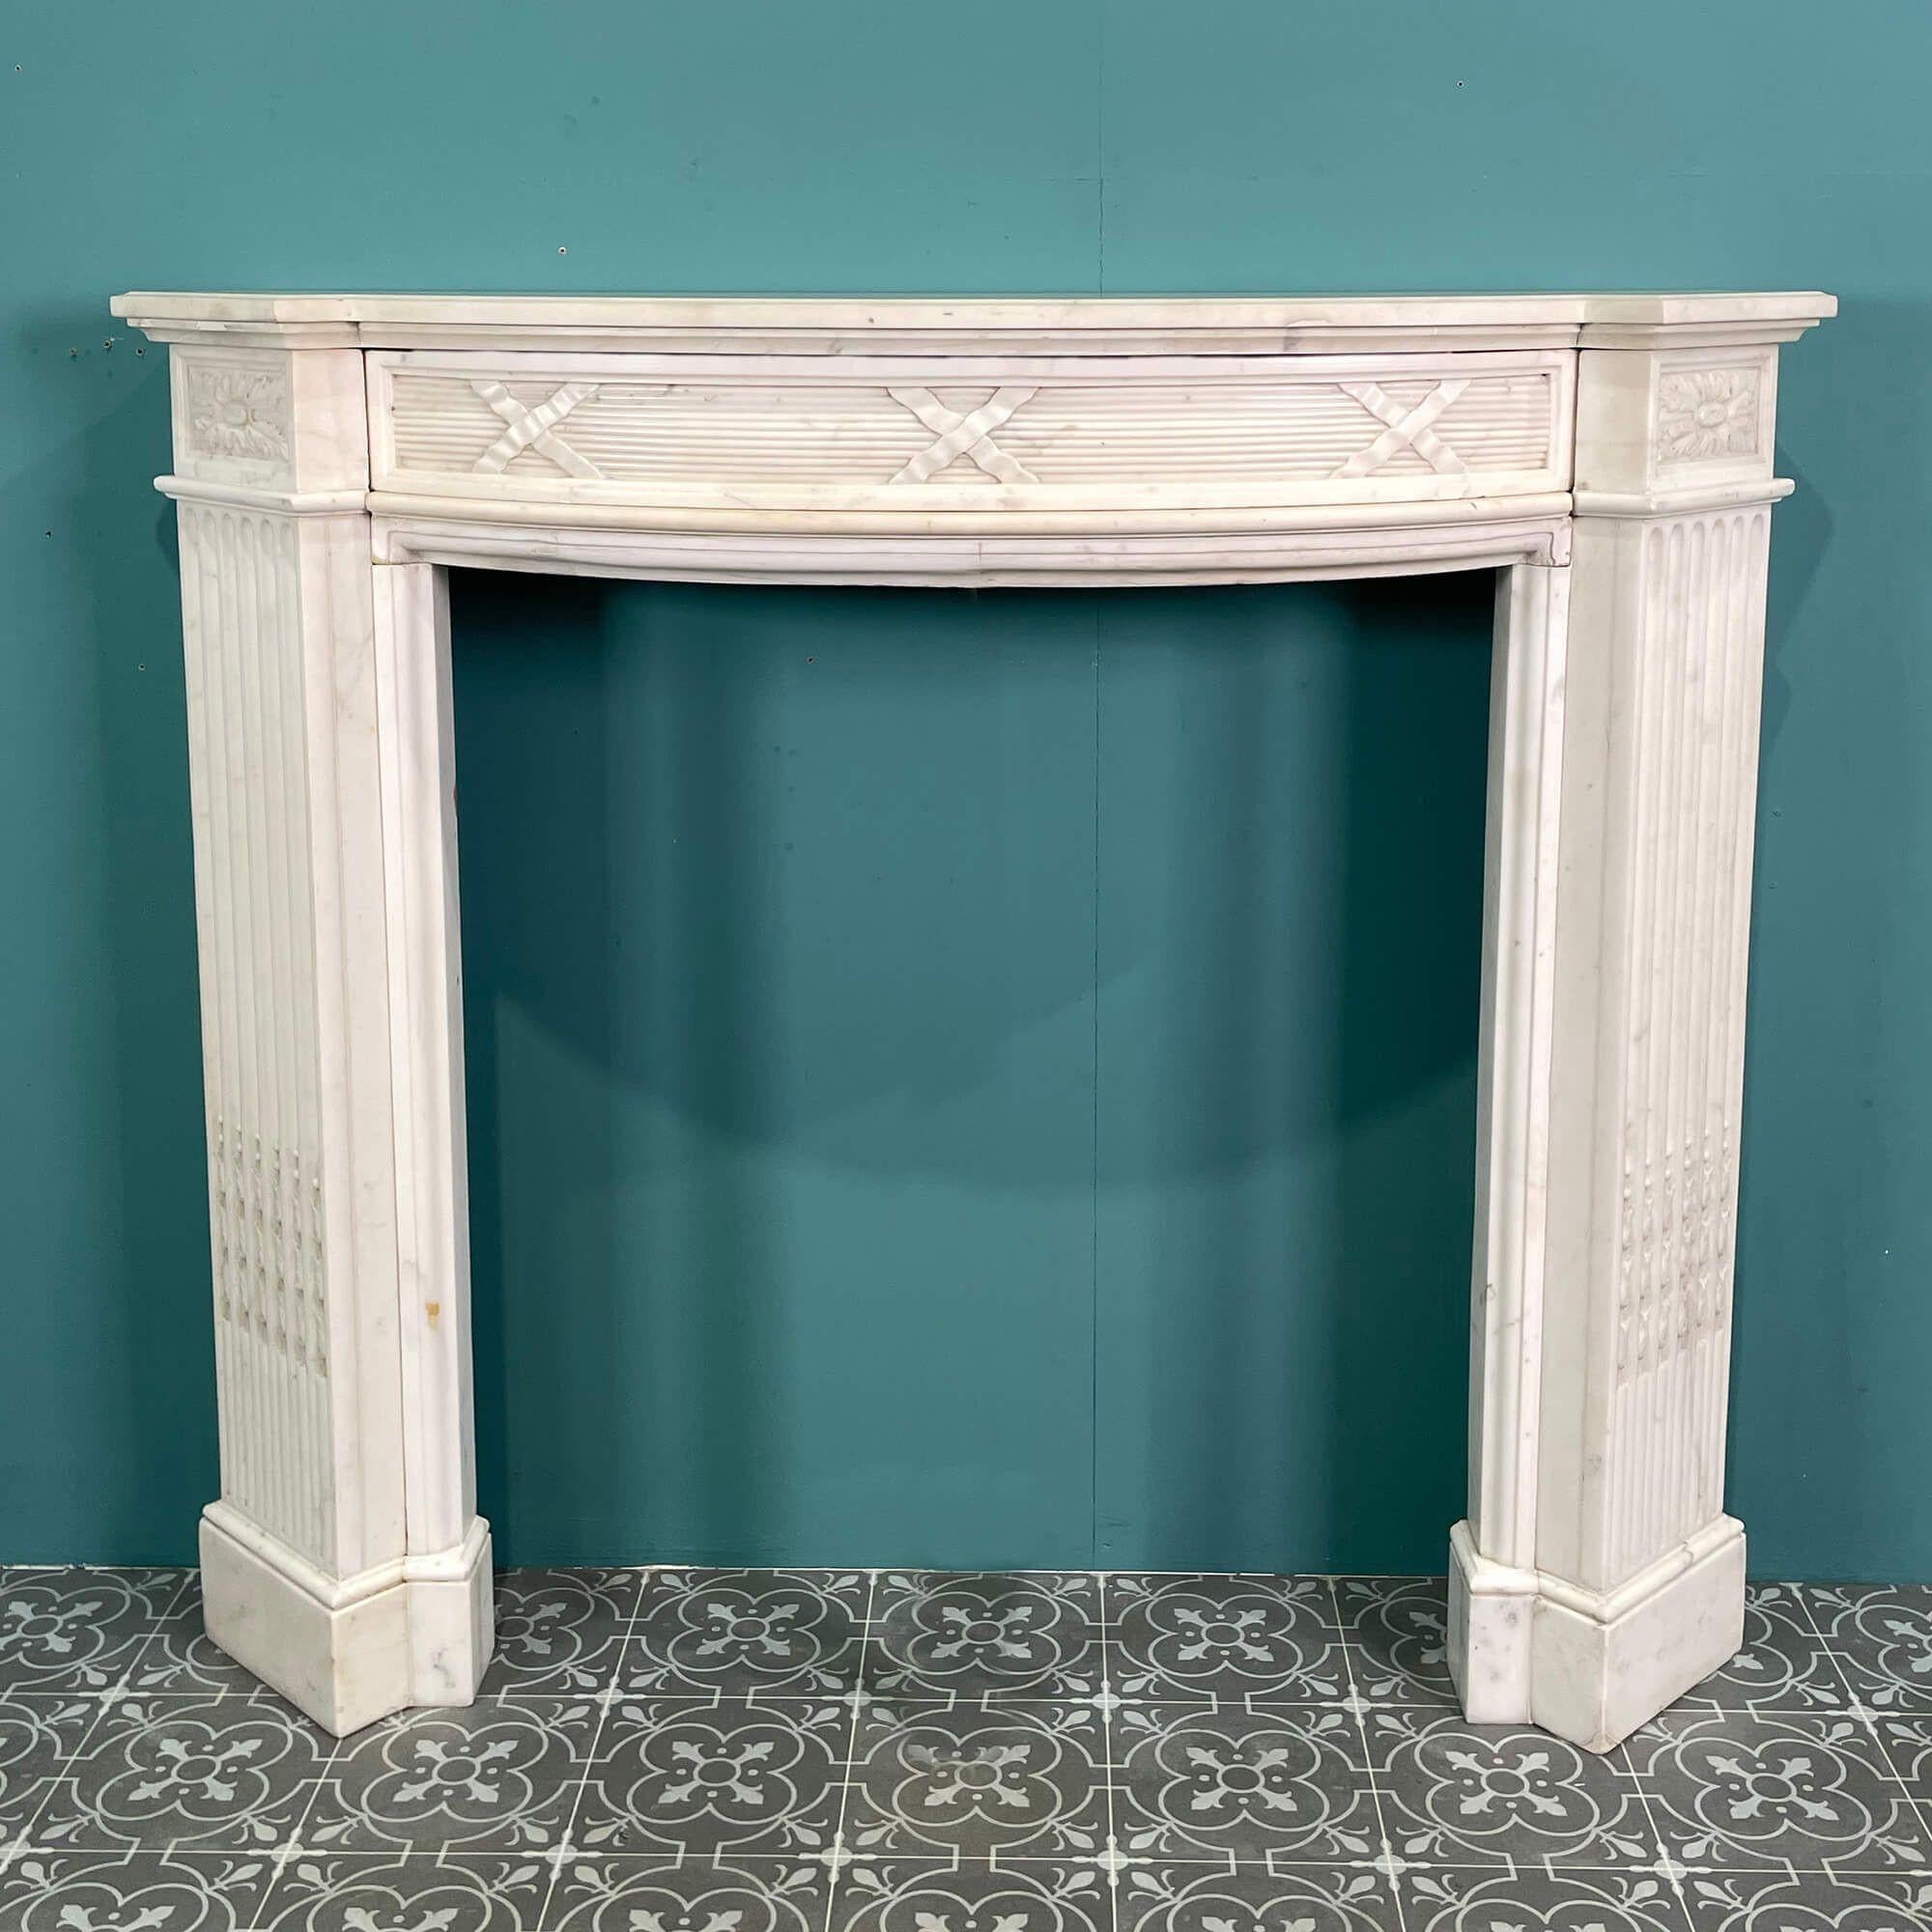 This stunning antique white marble fire mantel dates from the mid 1800s. Made entirely from statuary white marble, it is petite in scale with a curved bowfront rarely seen in antique fireplaces of this era. A mix of styles is present, showcasing